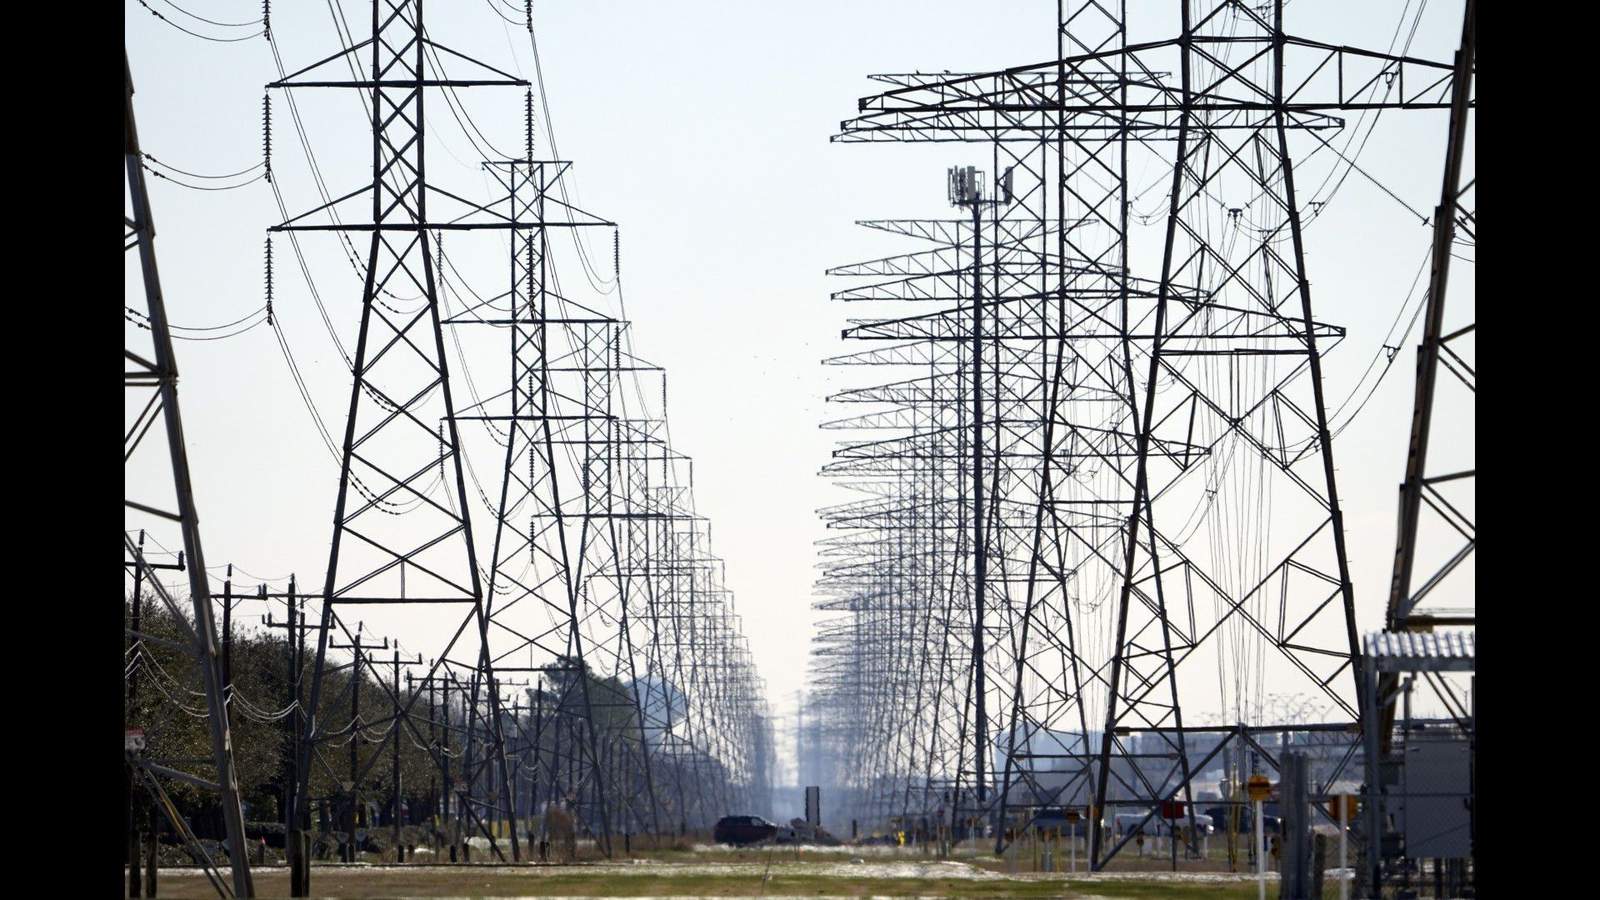 ERCOT Cancels Energy Conservation Notice for Texans, Gives Another Warning